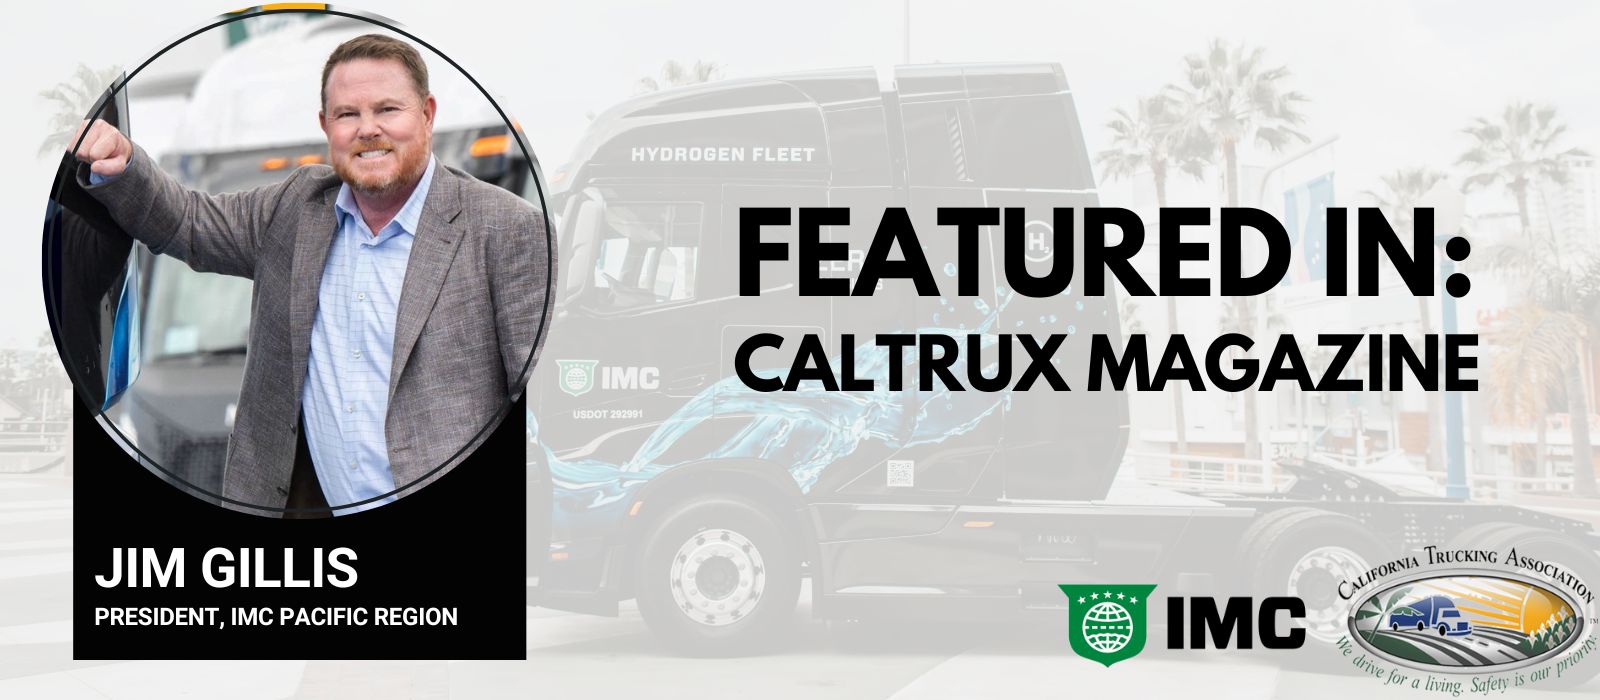 Jim Gillis Discusses Journey to the Industry with Caltrux